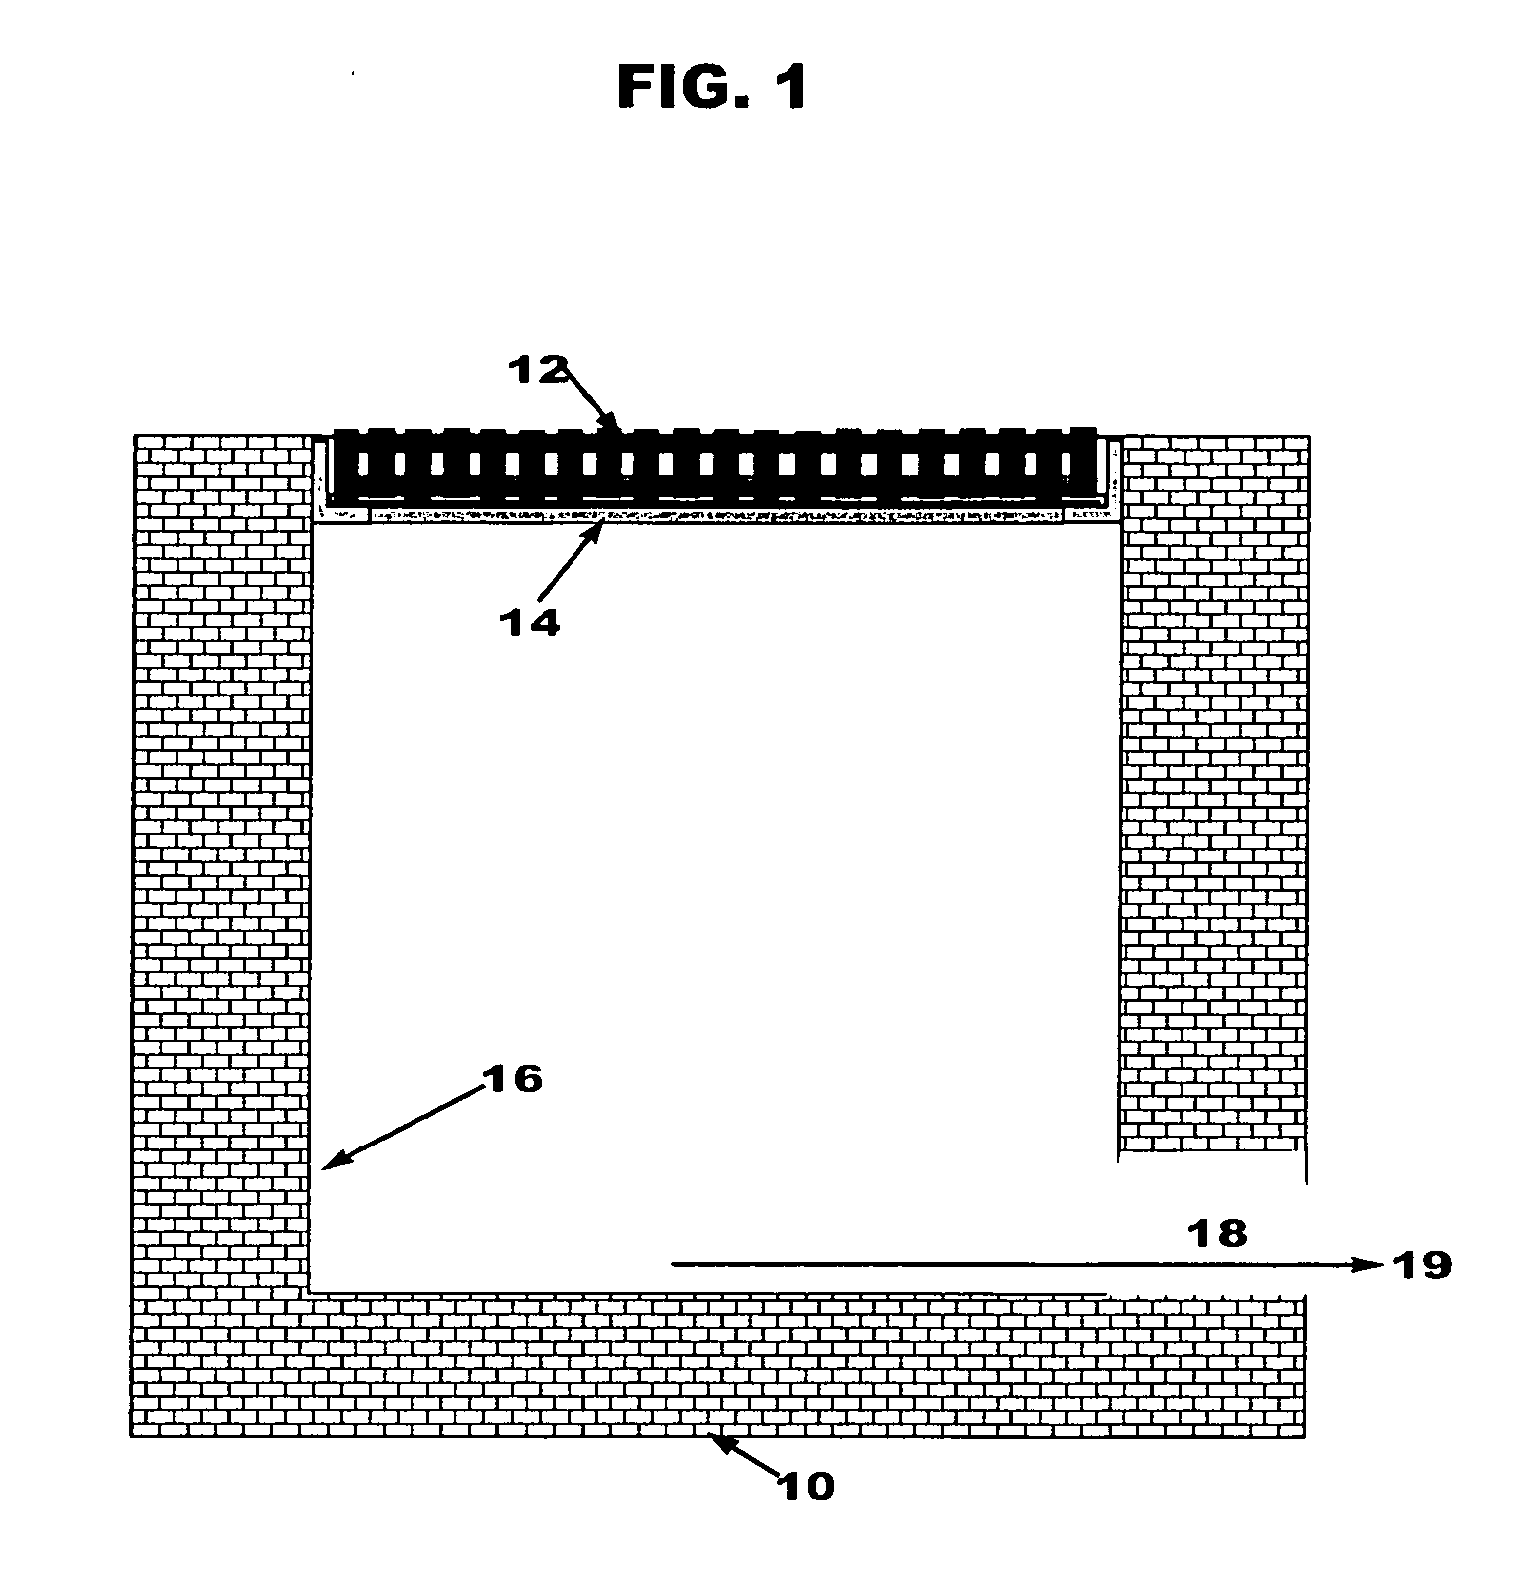 Watershed runoff drainage device & method